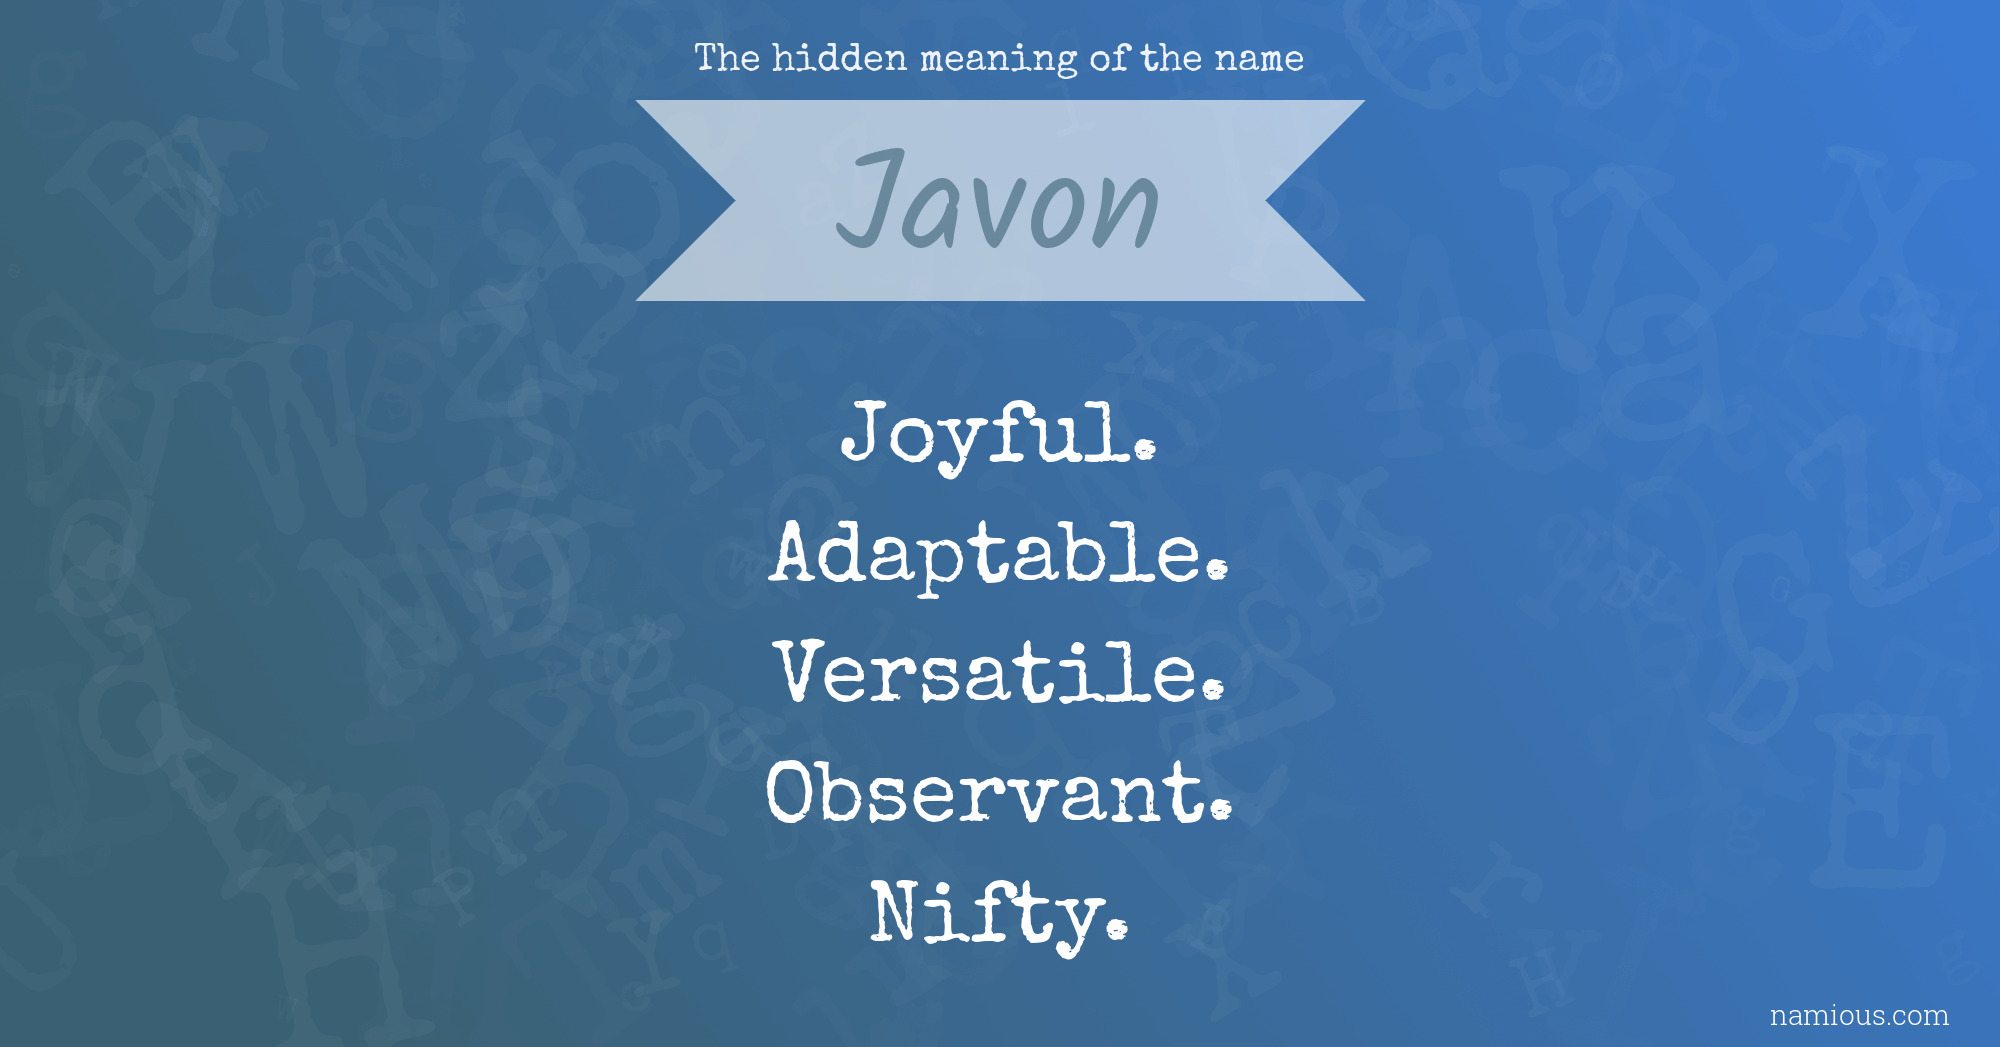 The hidden meaning of the name Javon